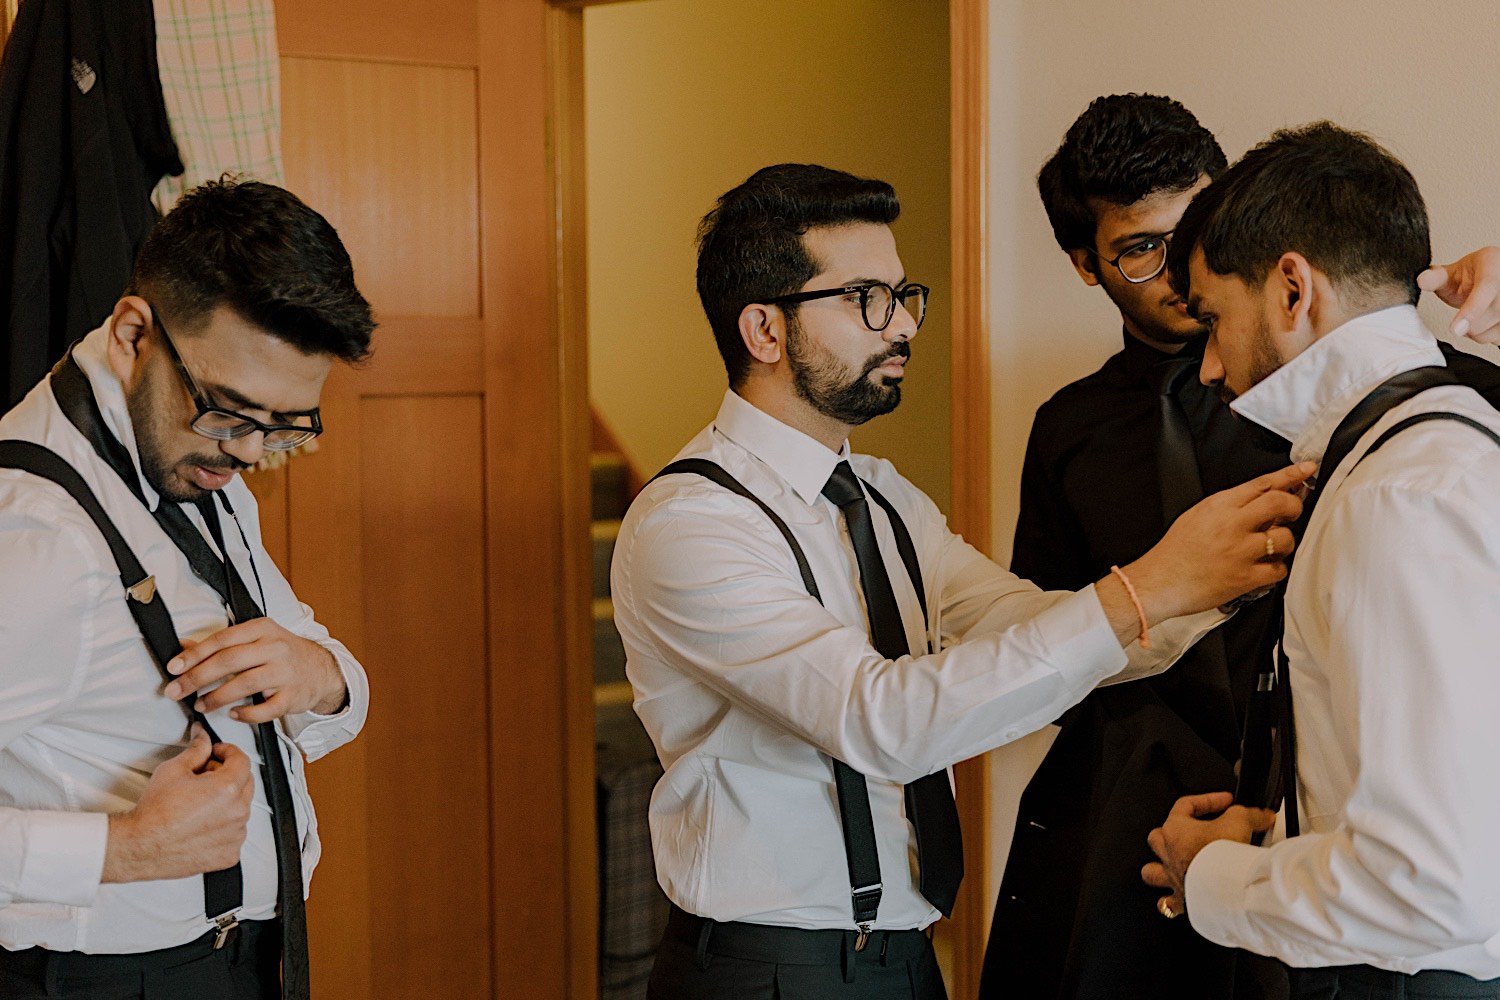 Groomsmen assisting one another with their ties as they get ready for a wedding